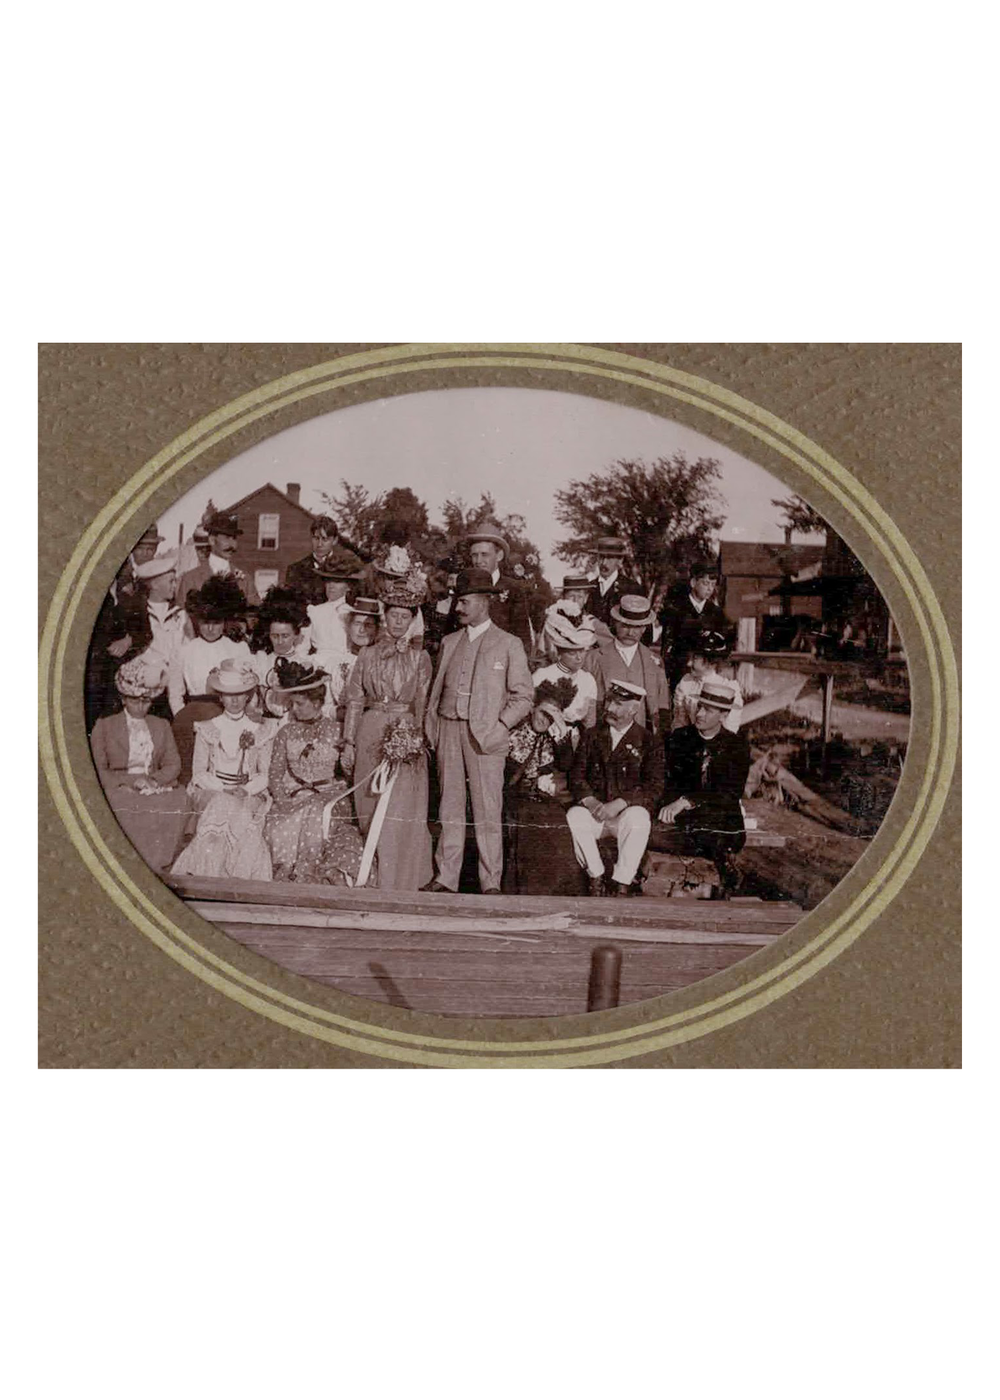 Georgie and Walter’s Wedding party, August 1, 1900.